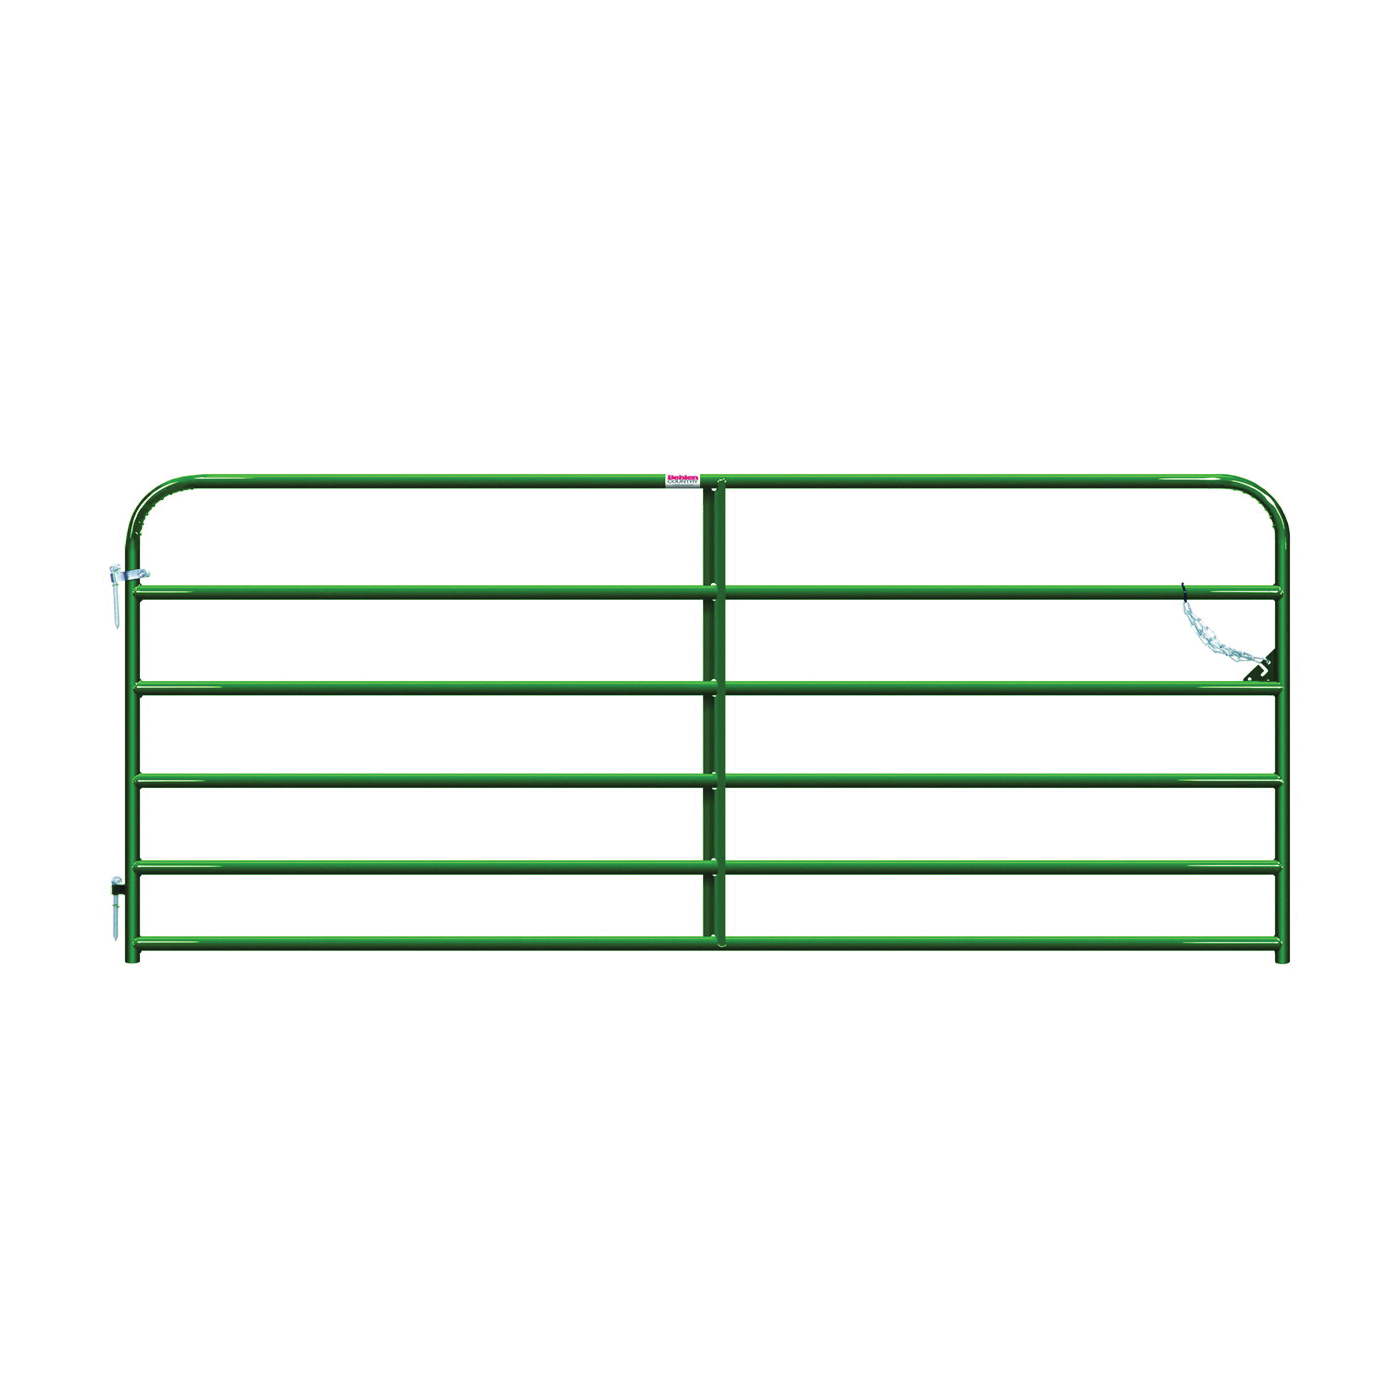 Behlen Country 40130102 Utility Gate, 10 ft W Gate, 50 in H Gate, 20 ga Frame Tube/Channel, Green